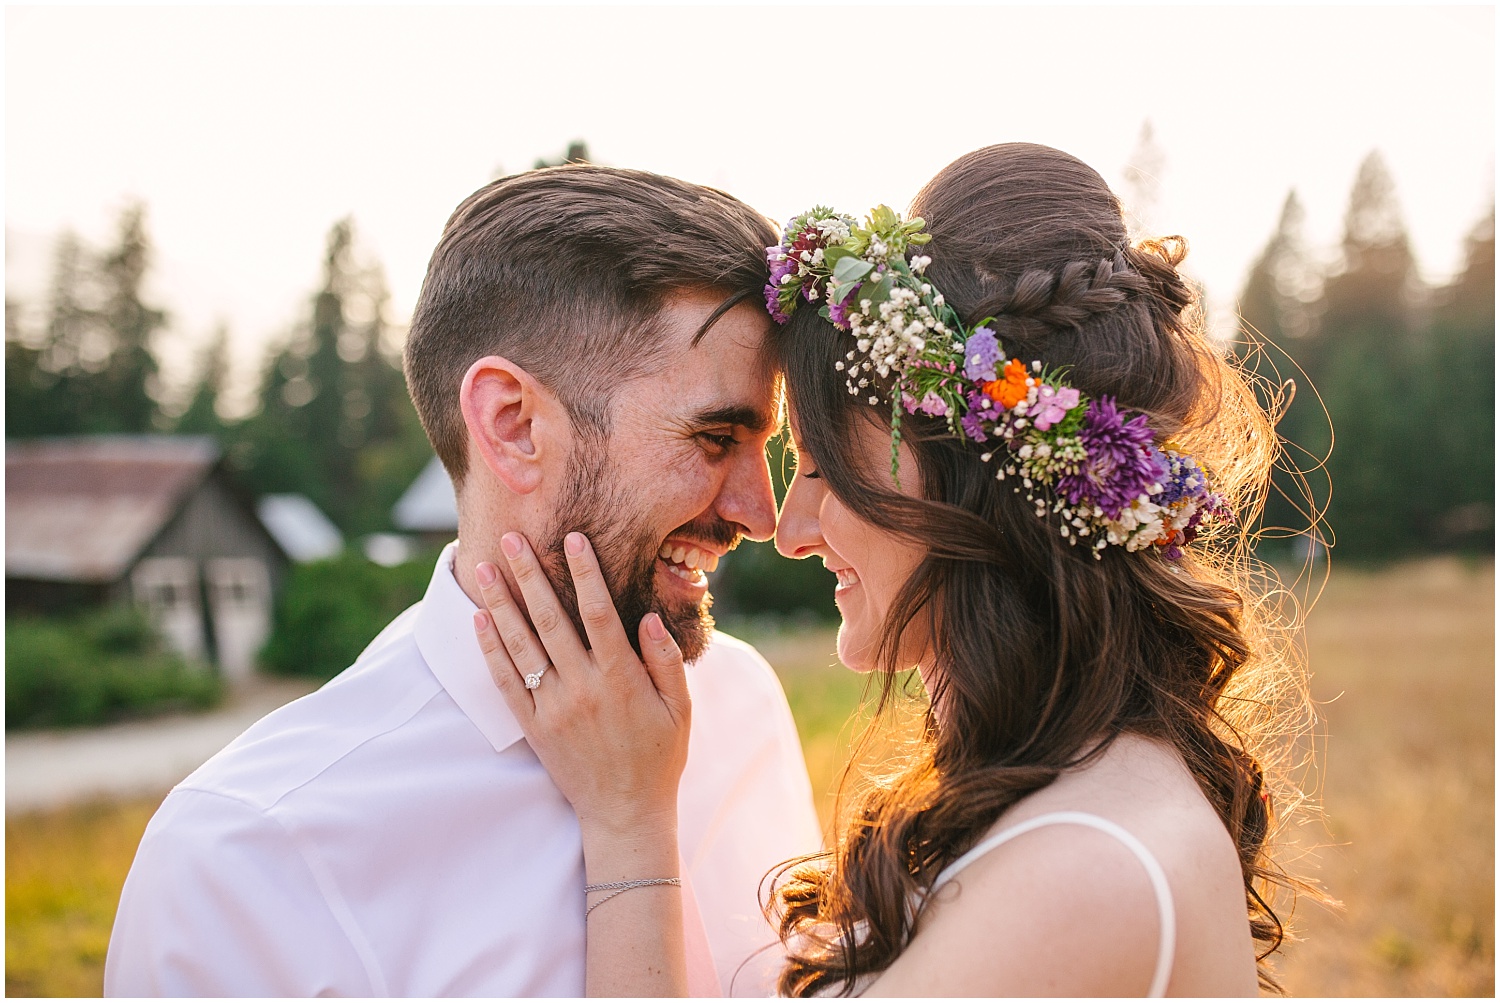 Boho chic bride and groom golden hour portraits at summer Brown Family Homestead wedding